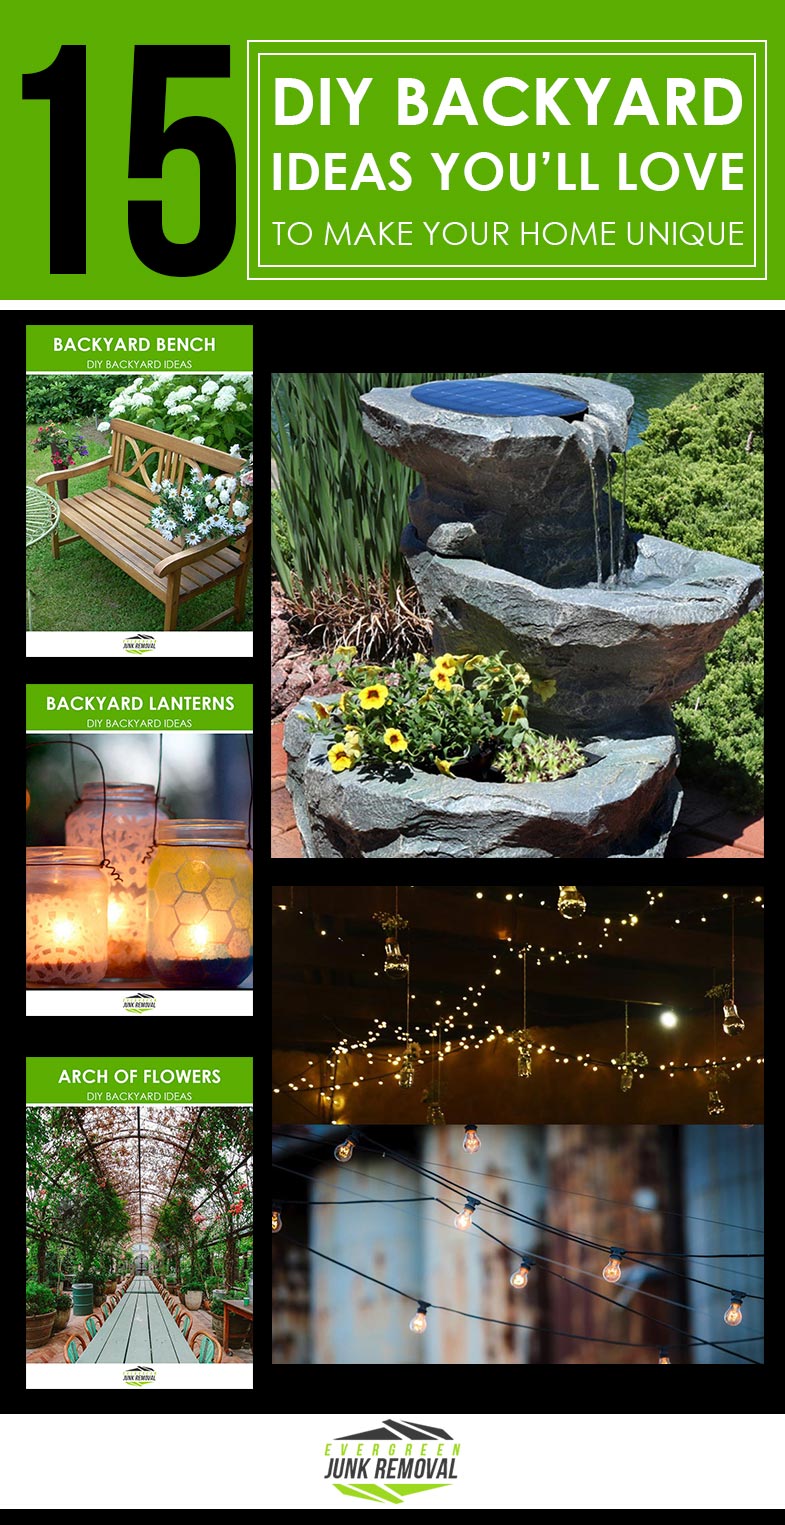 Evergreen Junk Removal Service - DIY Backyard Ideas To Make Your Home Even More Beautiful.